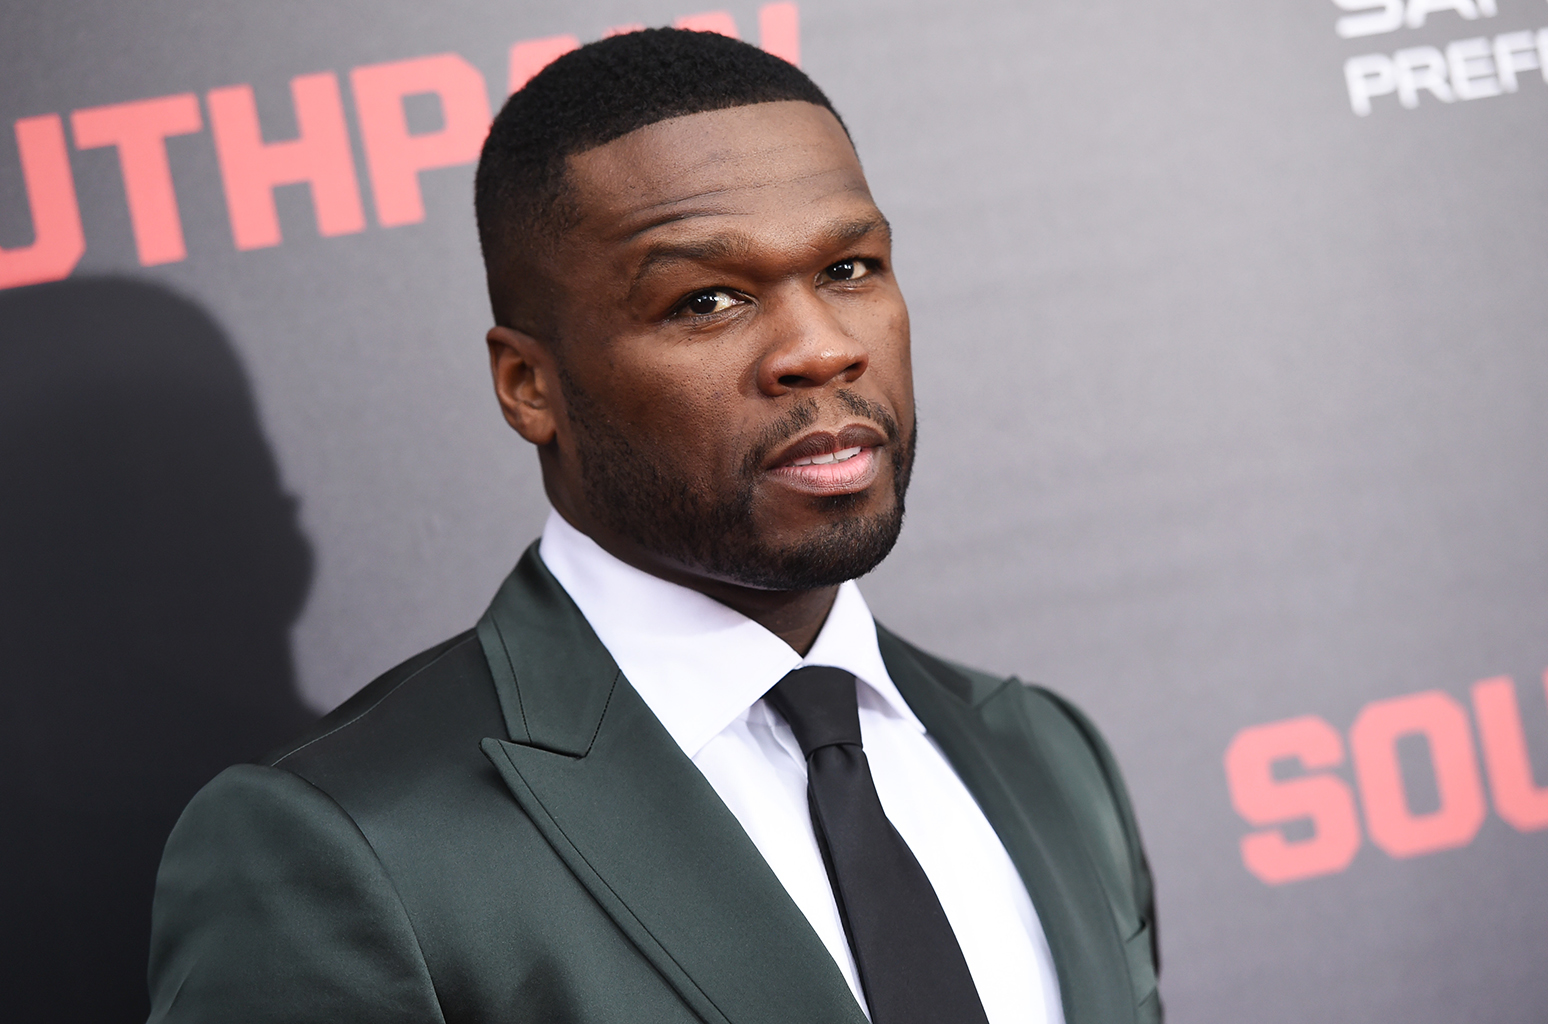 ‘Intercepted’ Drama Series From 50 Cent & La La Anthony In Works At Starz